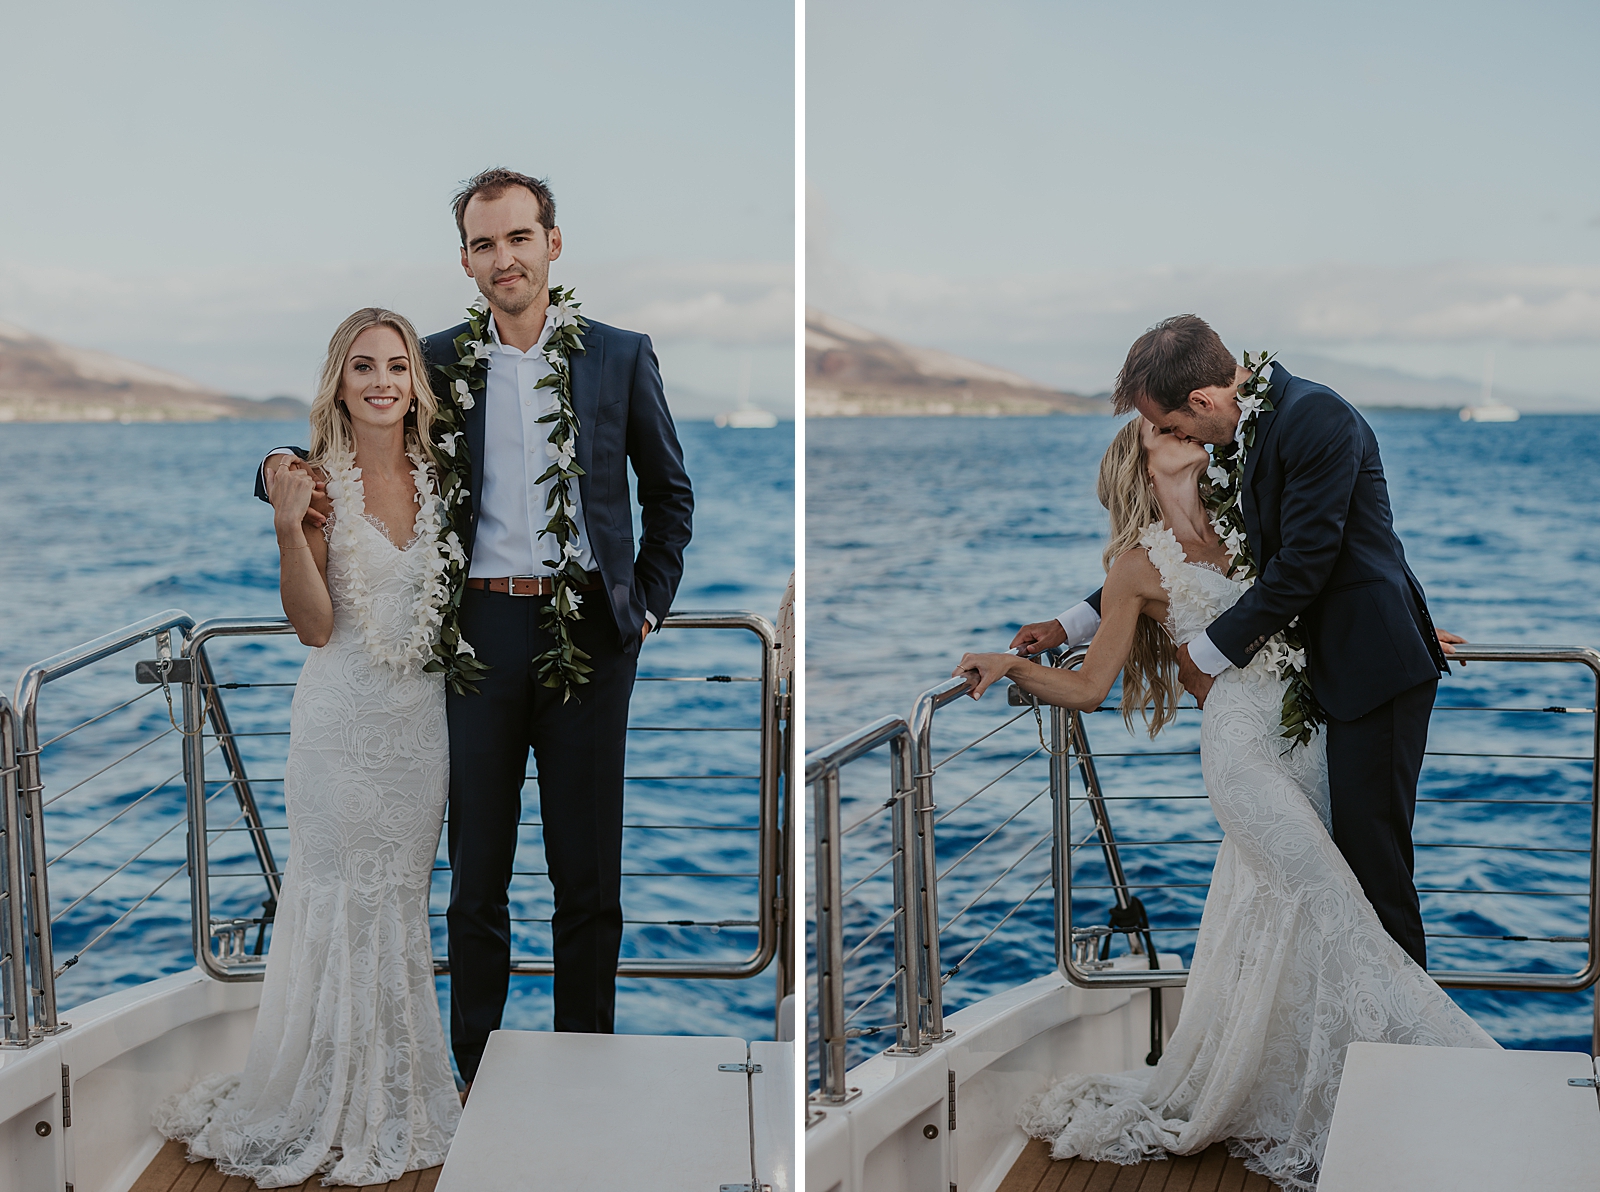 Bride and Groom portrait and kissing on the boat while out on the ocean